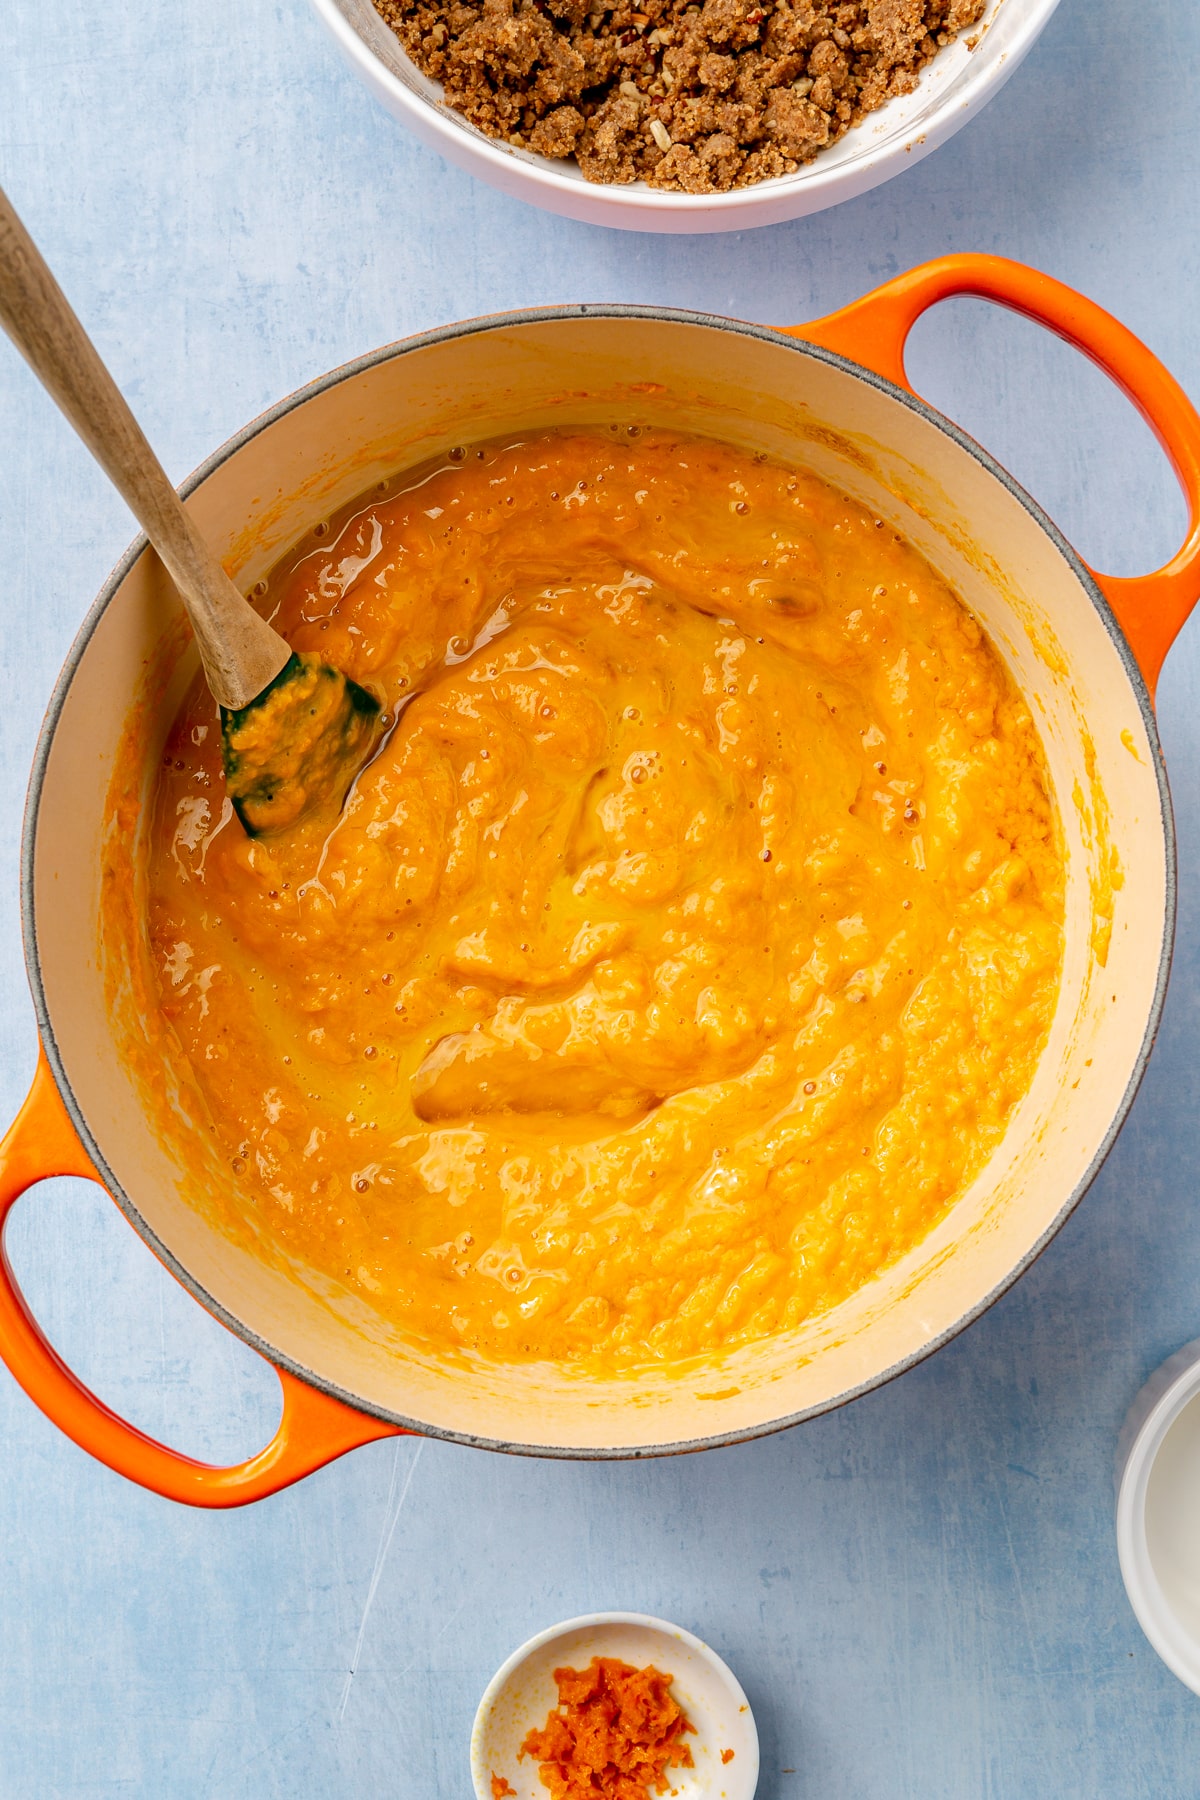 Sweet potato and the ingredients have been fully combined into a thick paste with a green spatula. The mixture sits in an orange, enameled pot.